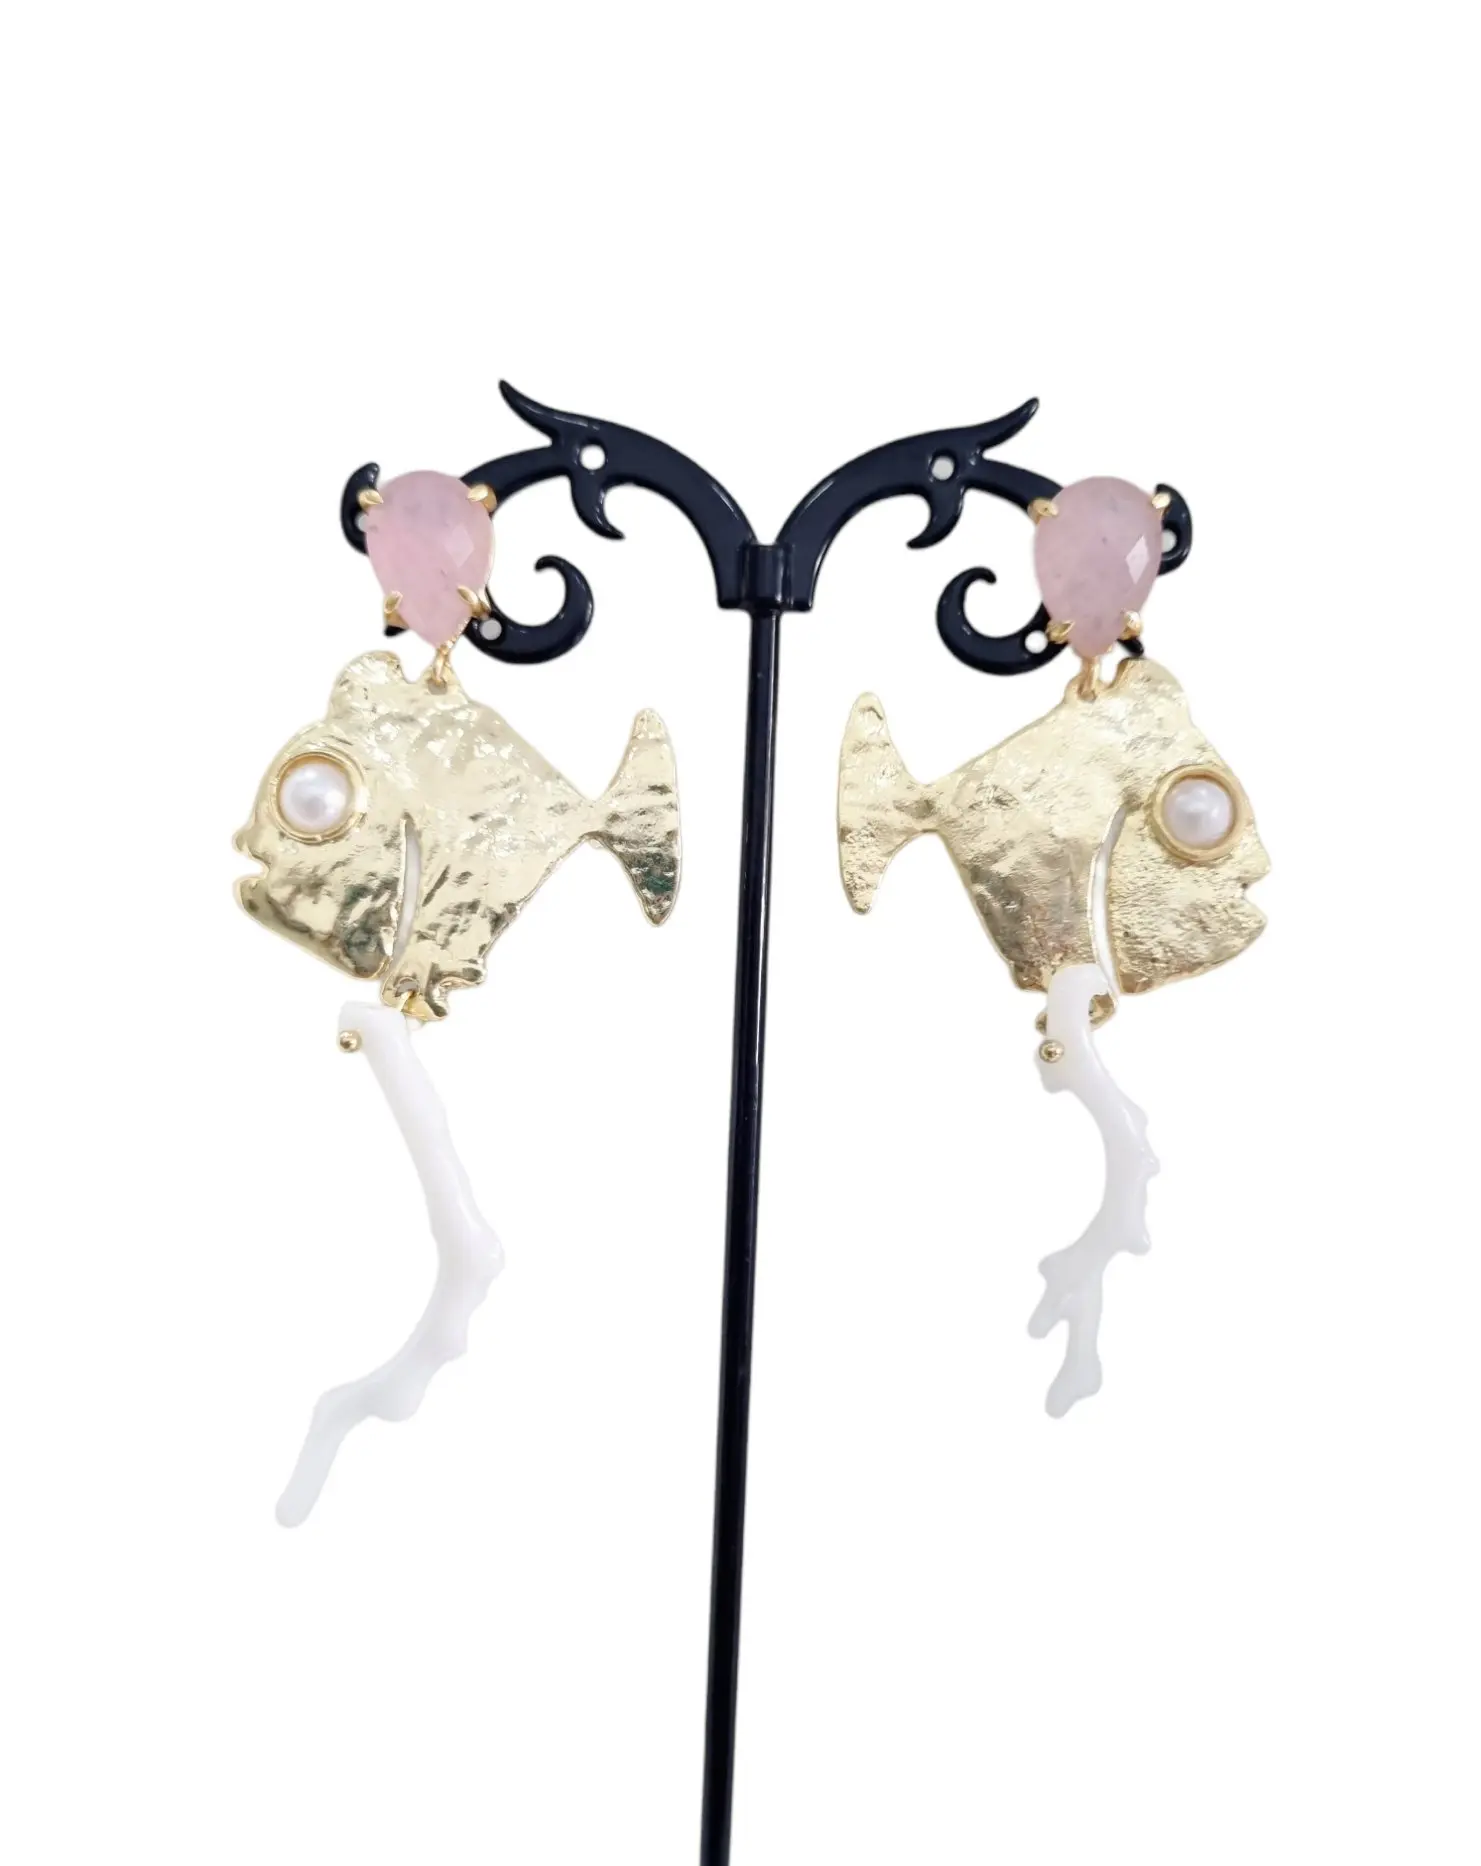 Earrings made with brass fish, rose quartz and white coral branch. Length 8cm Weight 8.8g